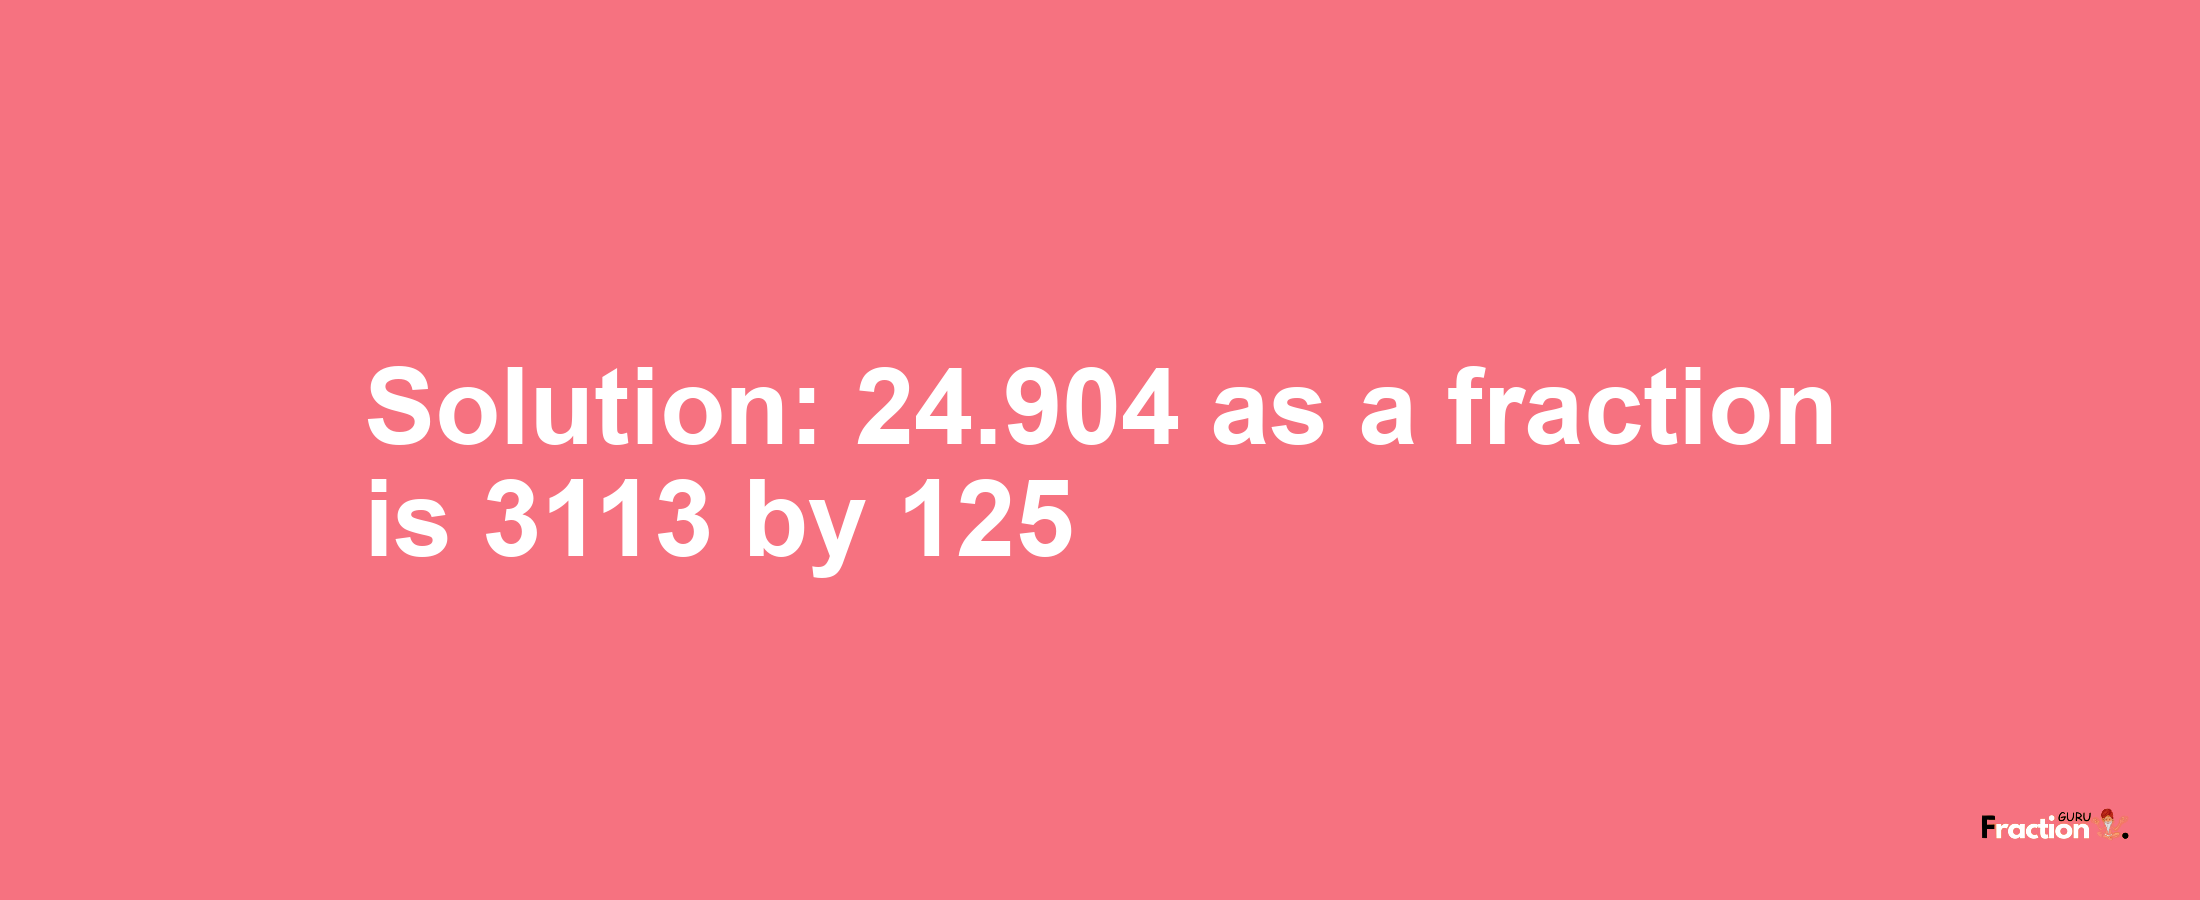 Solution:24.904 as a fraction is 3113/125